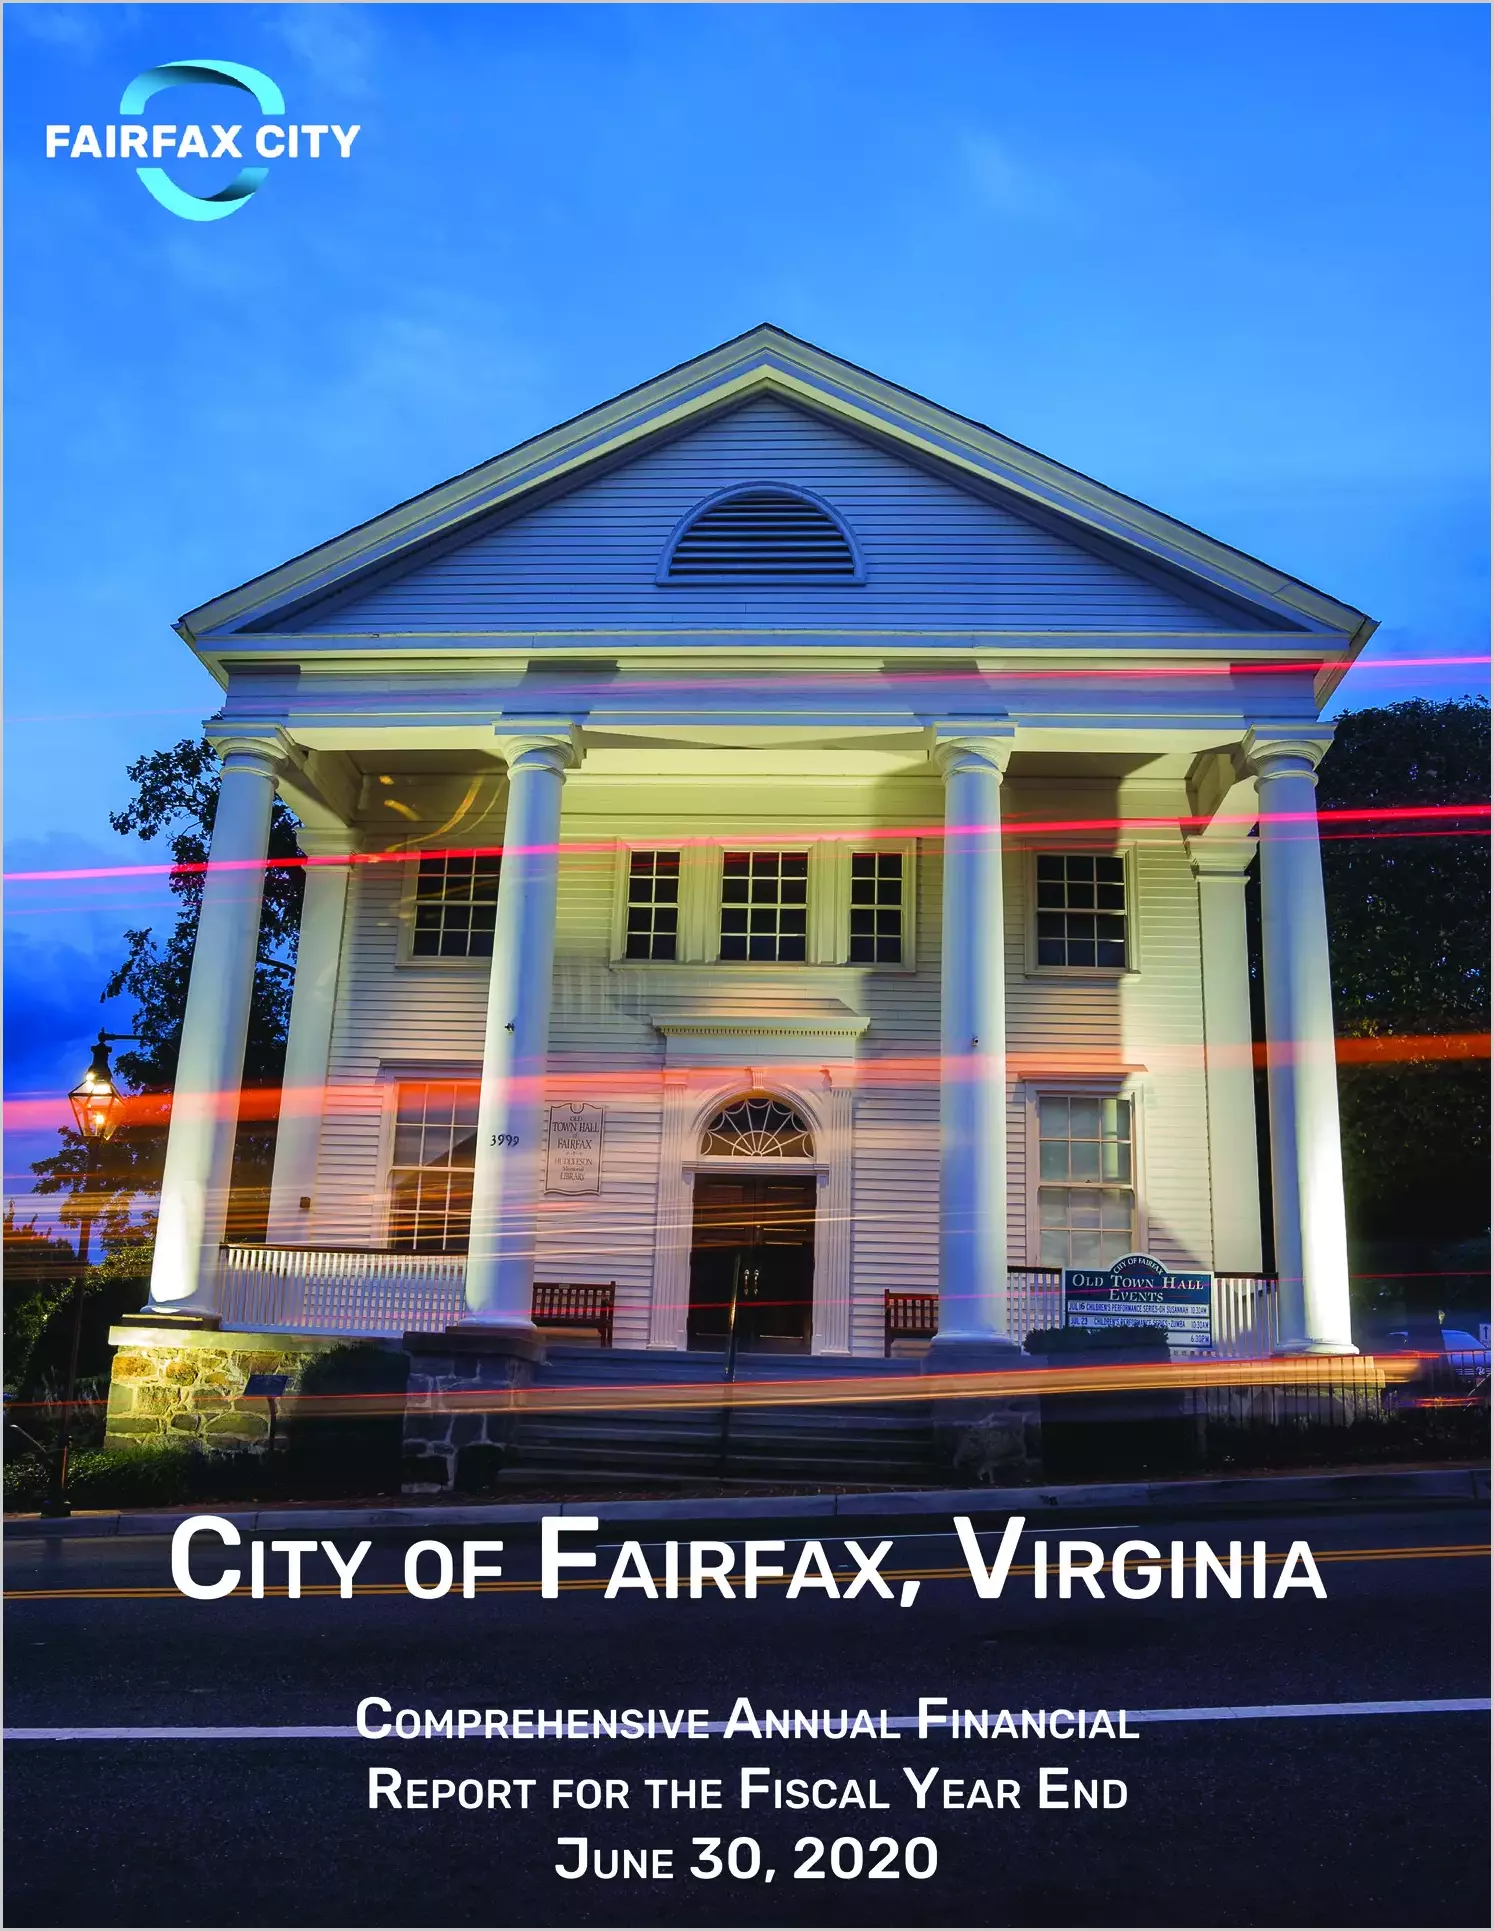 2020 Annual Financial Report for City of Fairfax